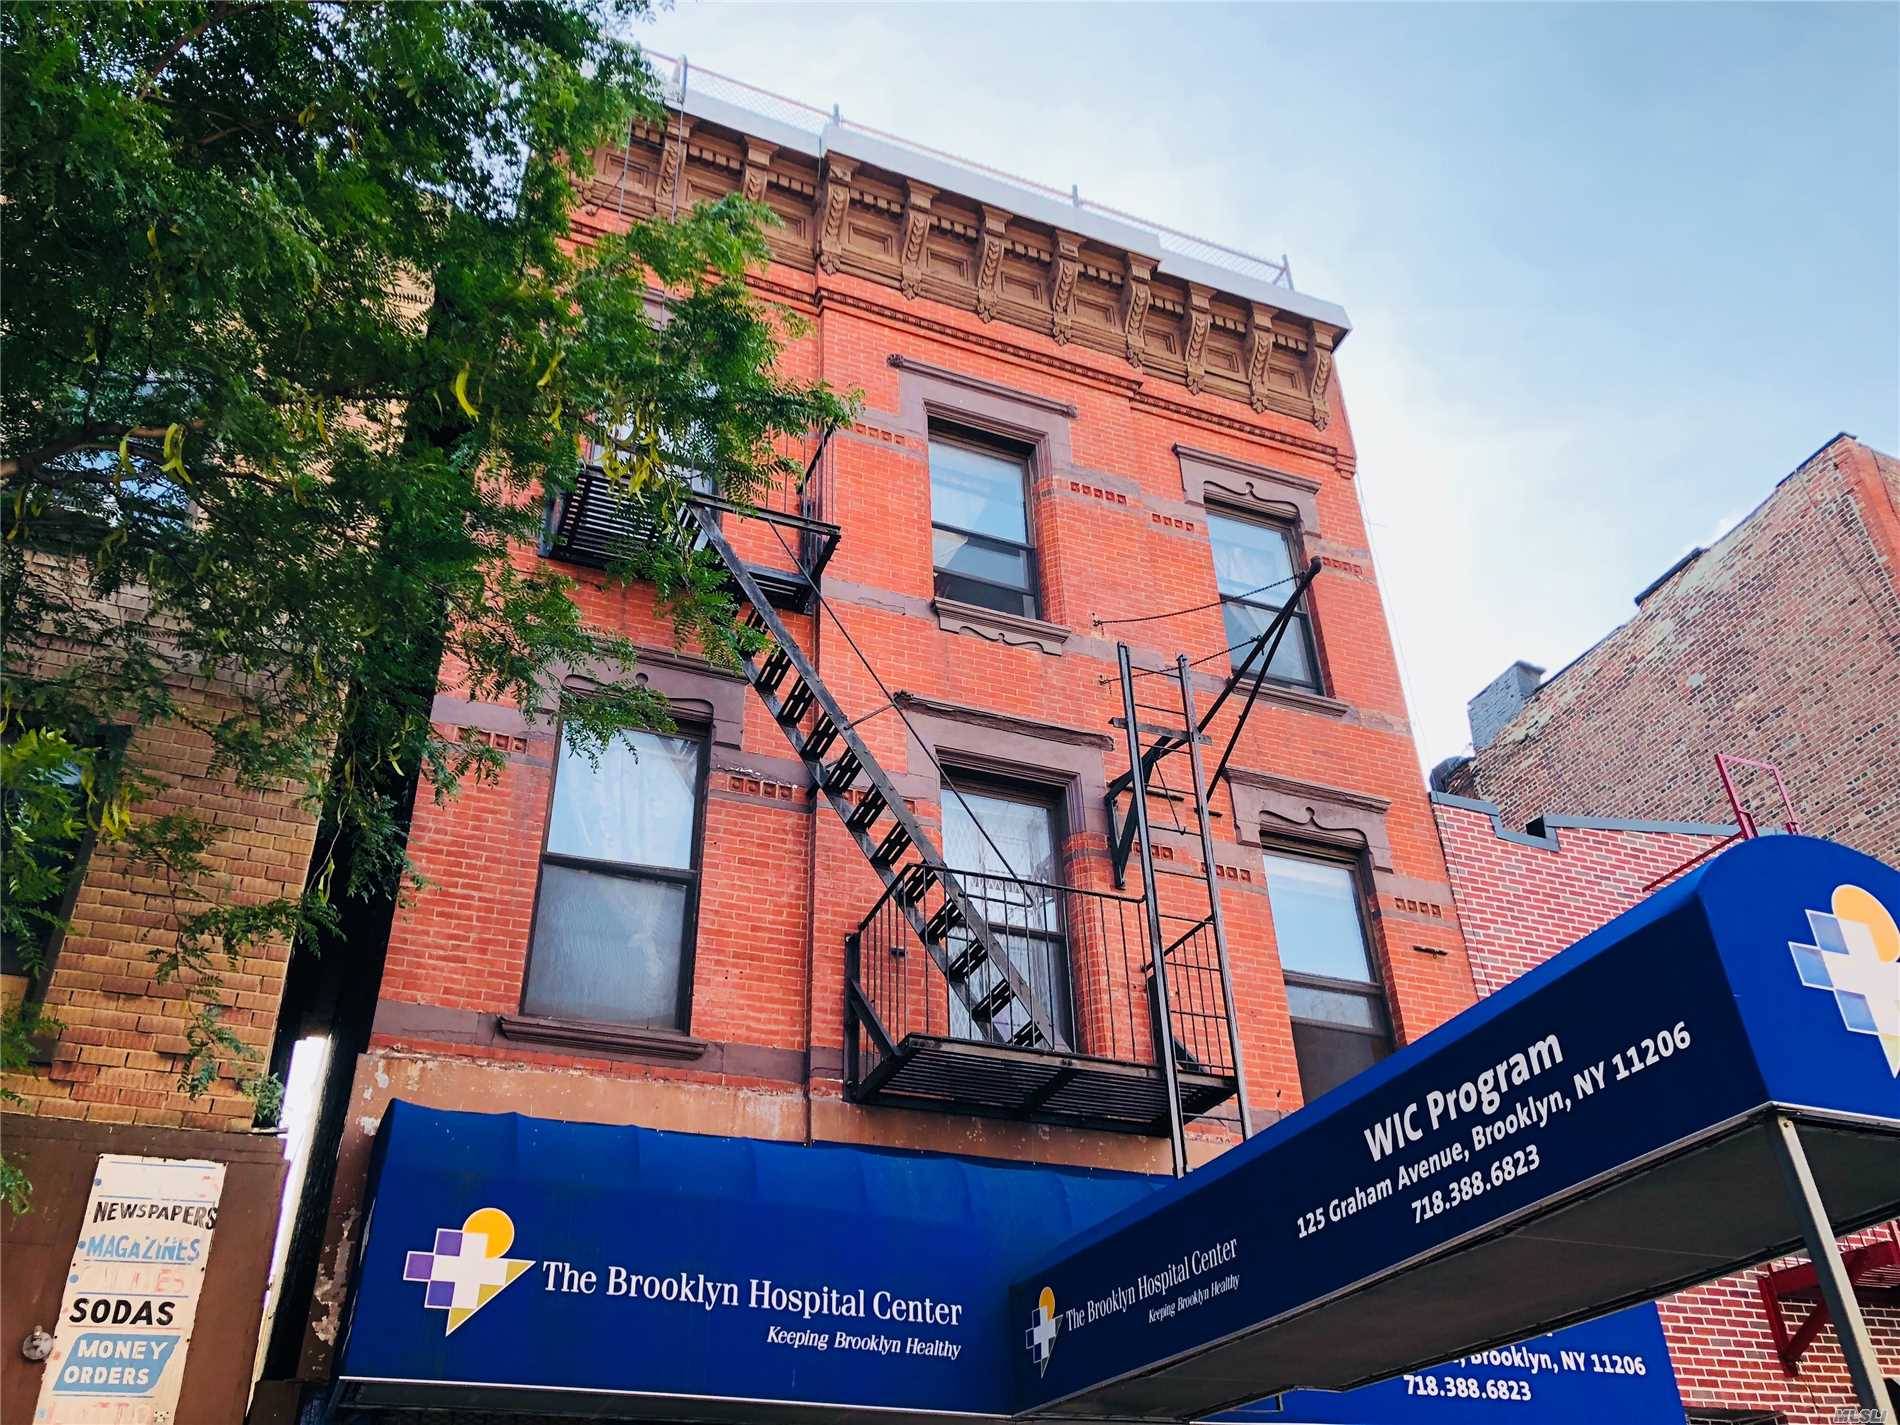 Spacious, Four Bedroom, Two Bathroom Rental In The Heart Of East Williamsburg!